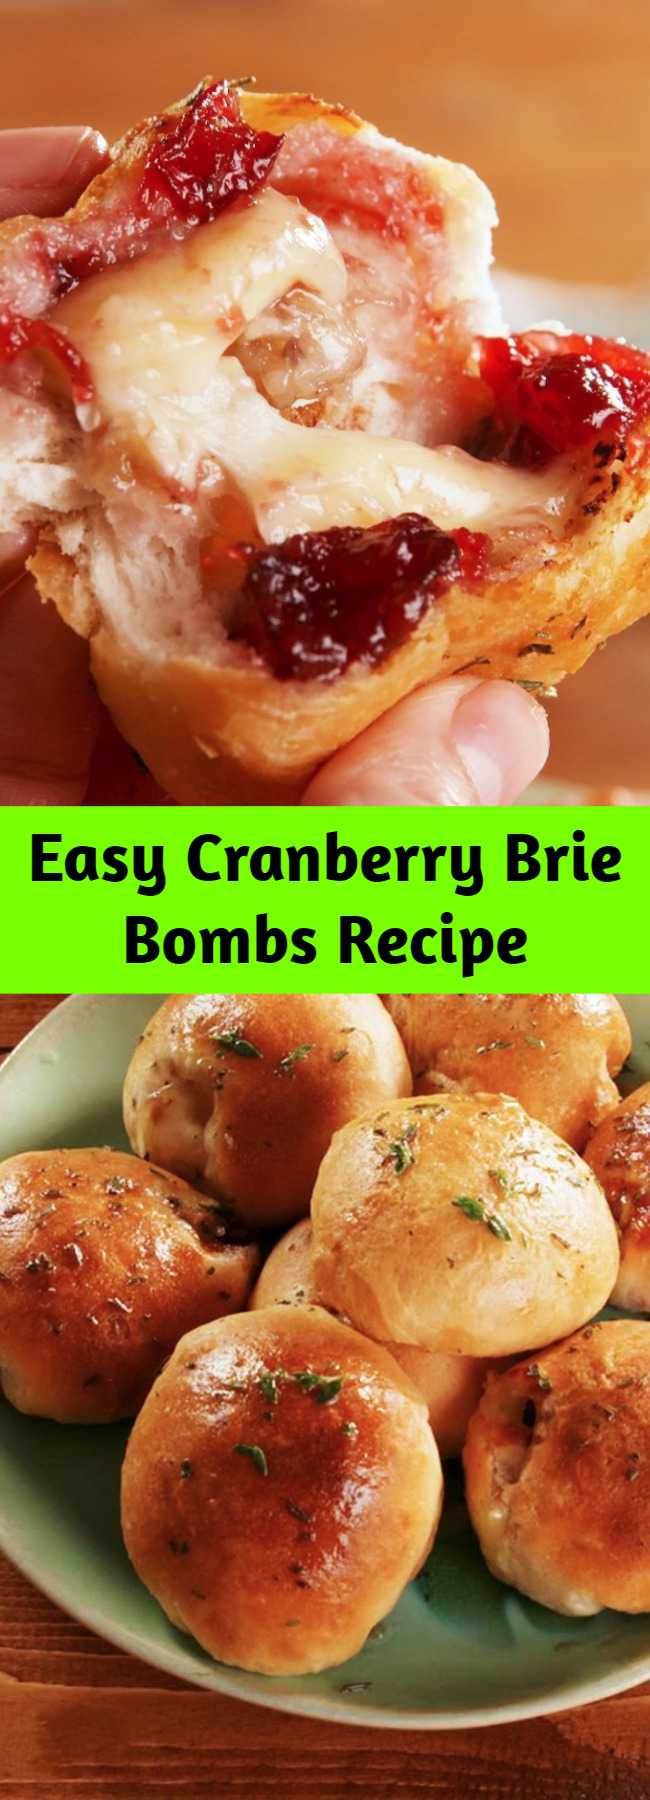 Easy Cranberry Brie Bombs Recipe - This easy appetizer is perfect for your holiday party. It's just another reason why we love biscuit dough! Stuffing crescent roll with brie and cranberry sauce is life changing. #easy #recipe #brie #cranberry #appetizer #thanksgiving #bombs #cheese